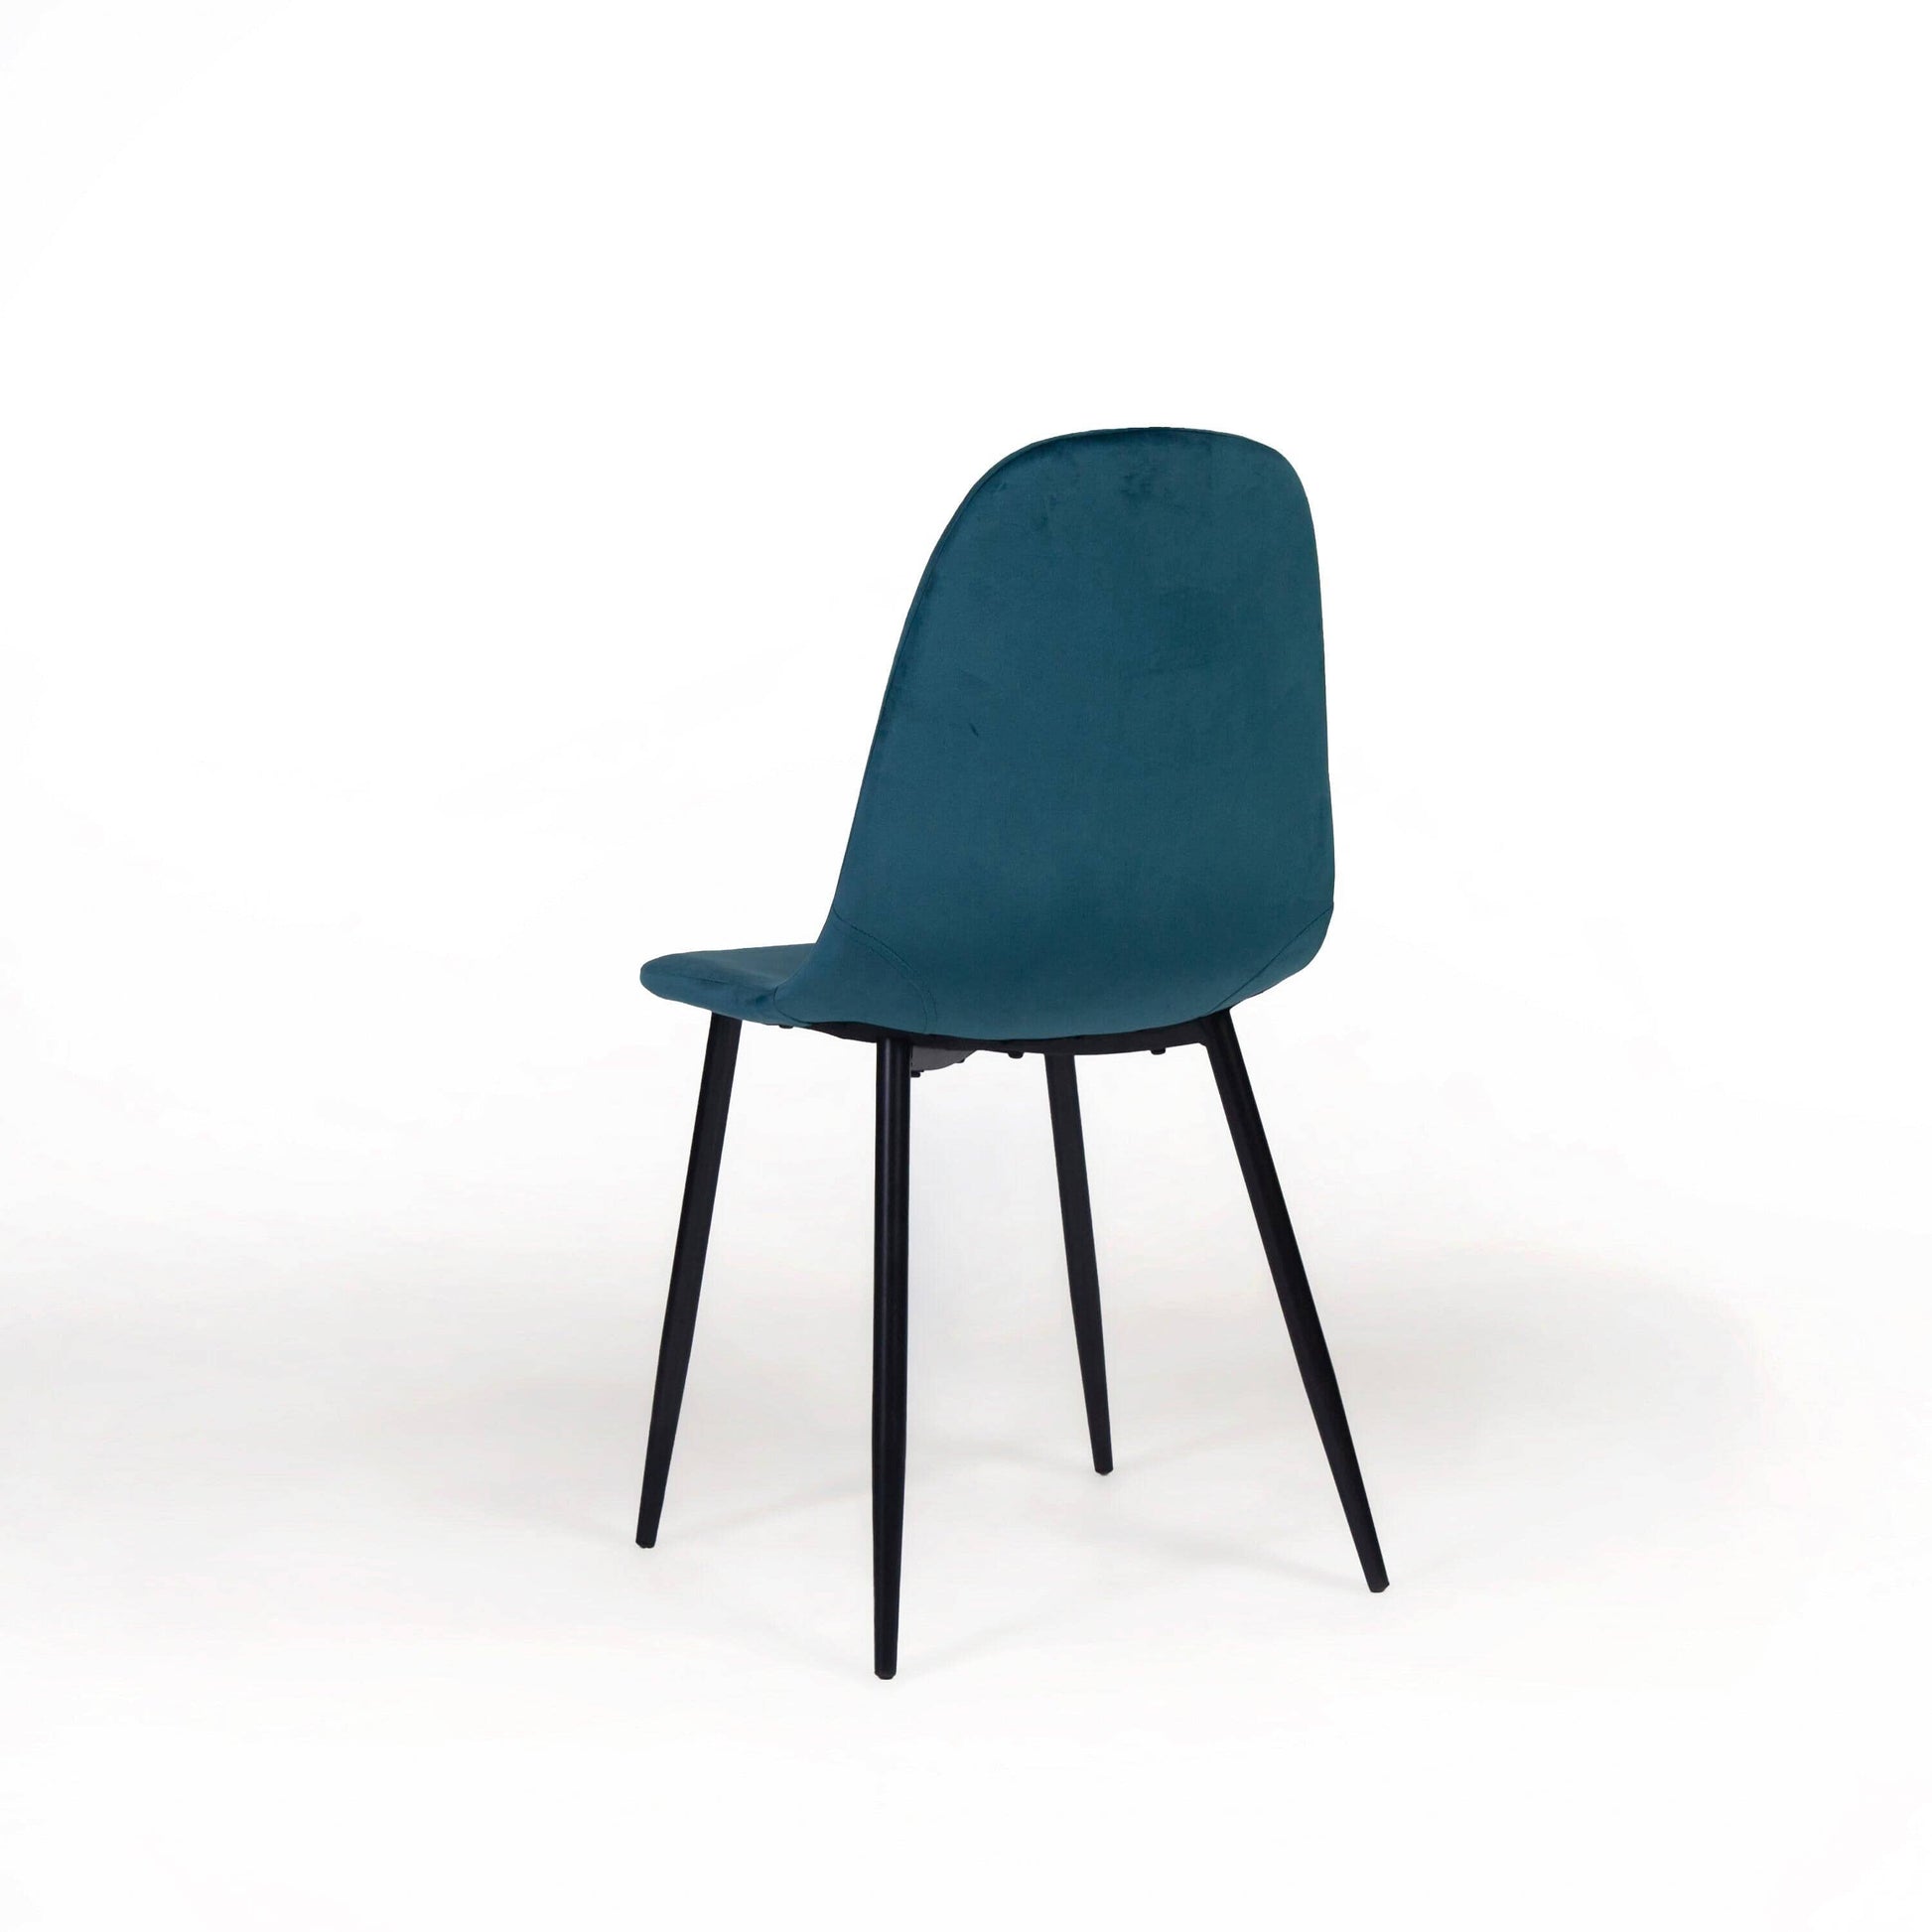 Ellis dining chairs - set of 2 - teal and black - Laura James